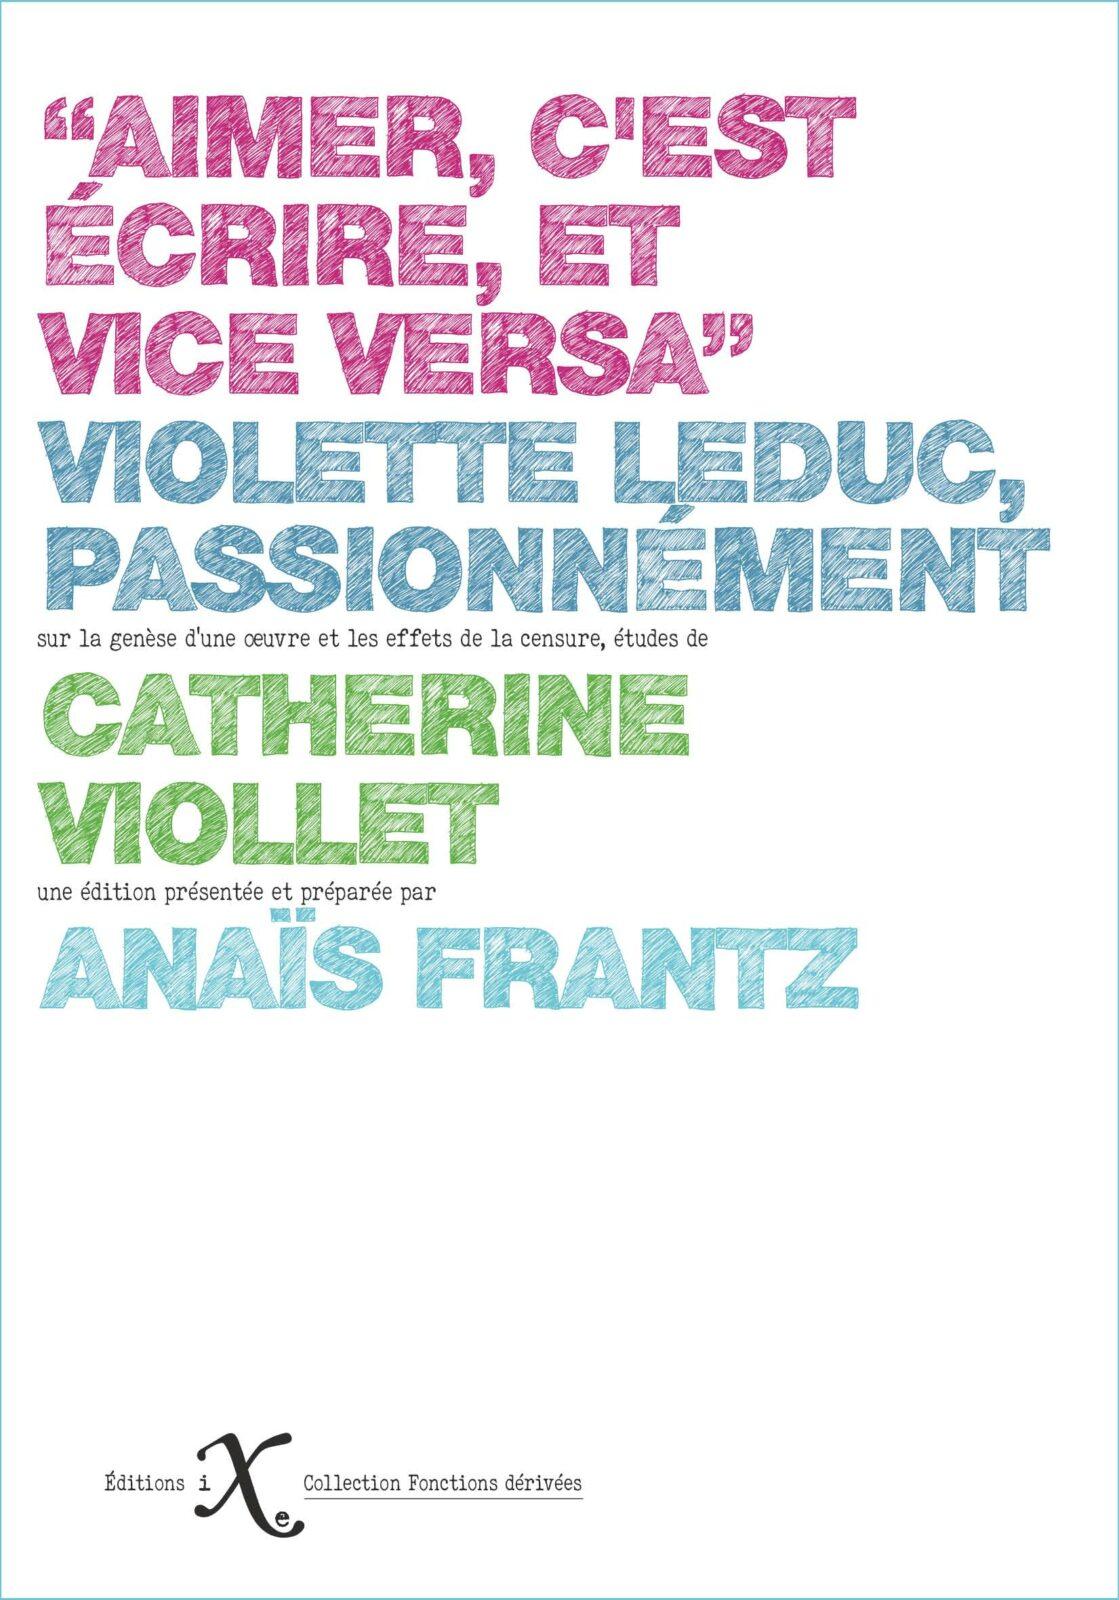 You are currently viewing  Librairie Des femmes - Paris